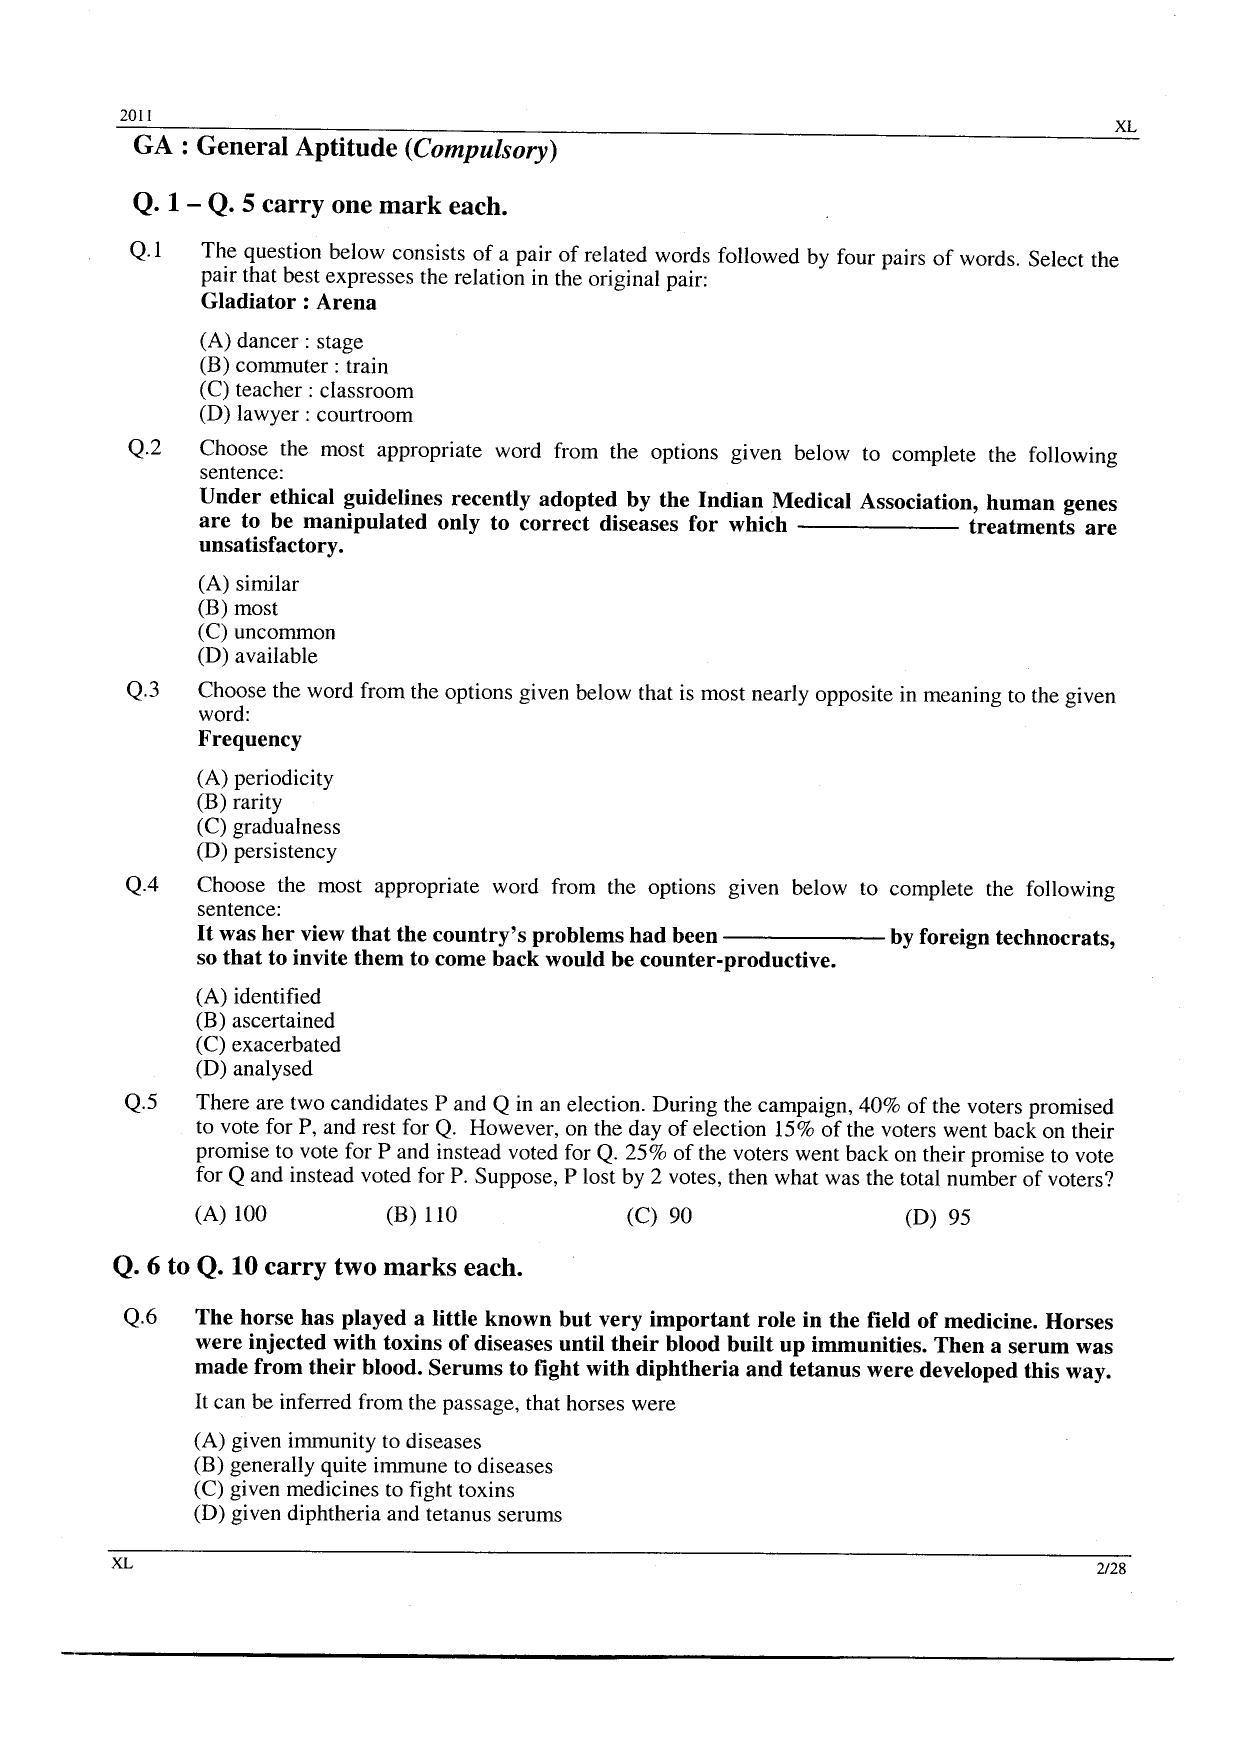 GATE 2011 Life Sciences (XL) Question Paper with Answer Key - Page 2